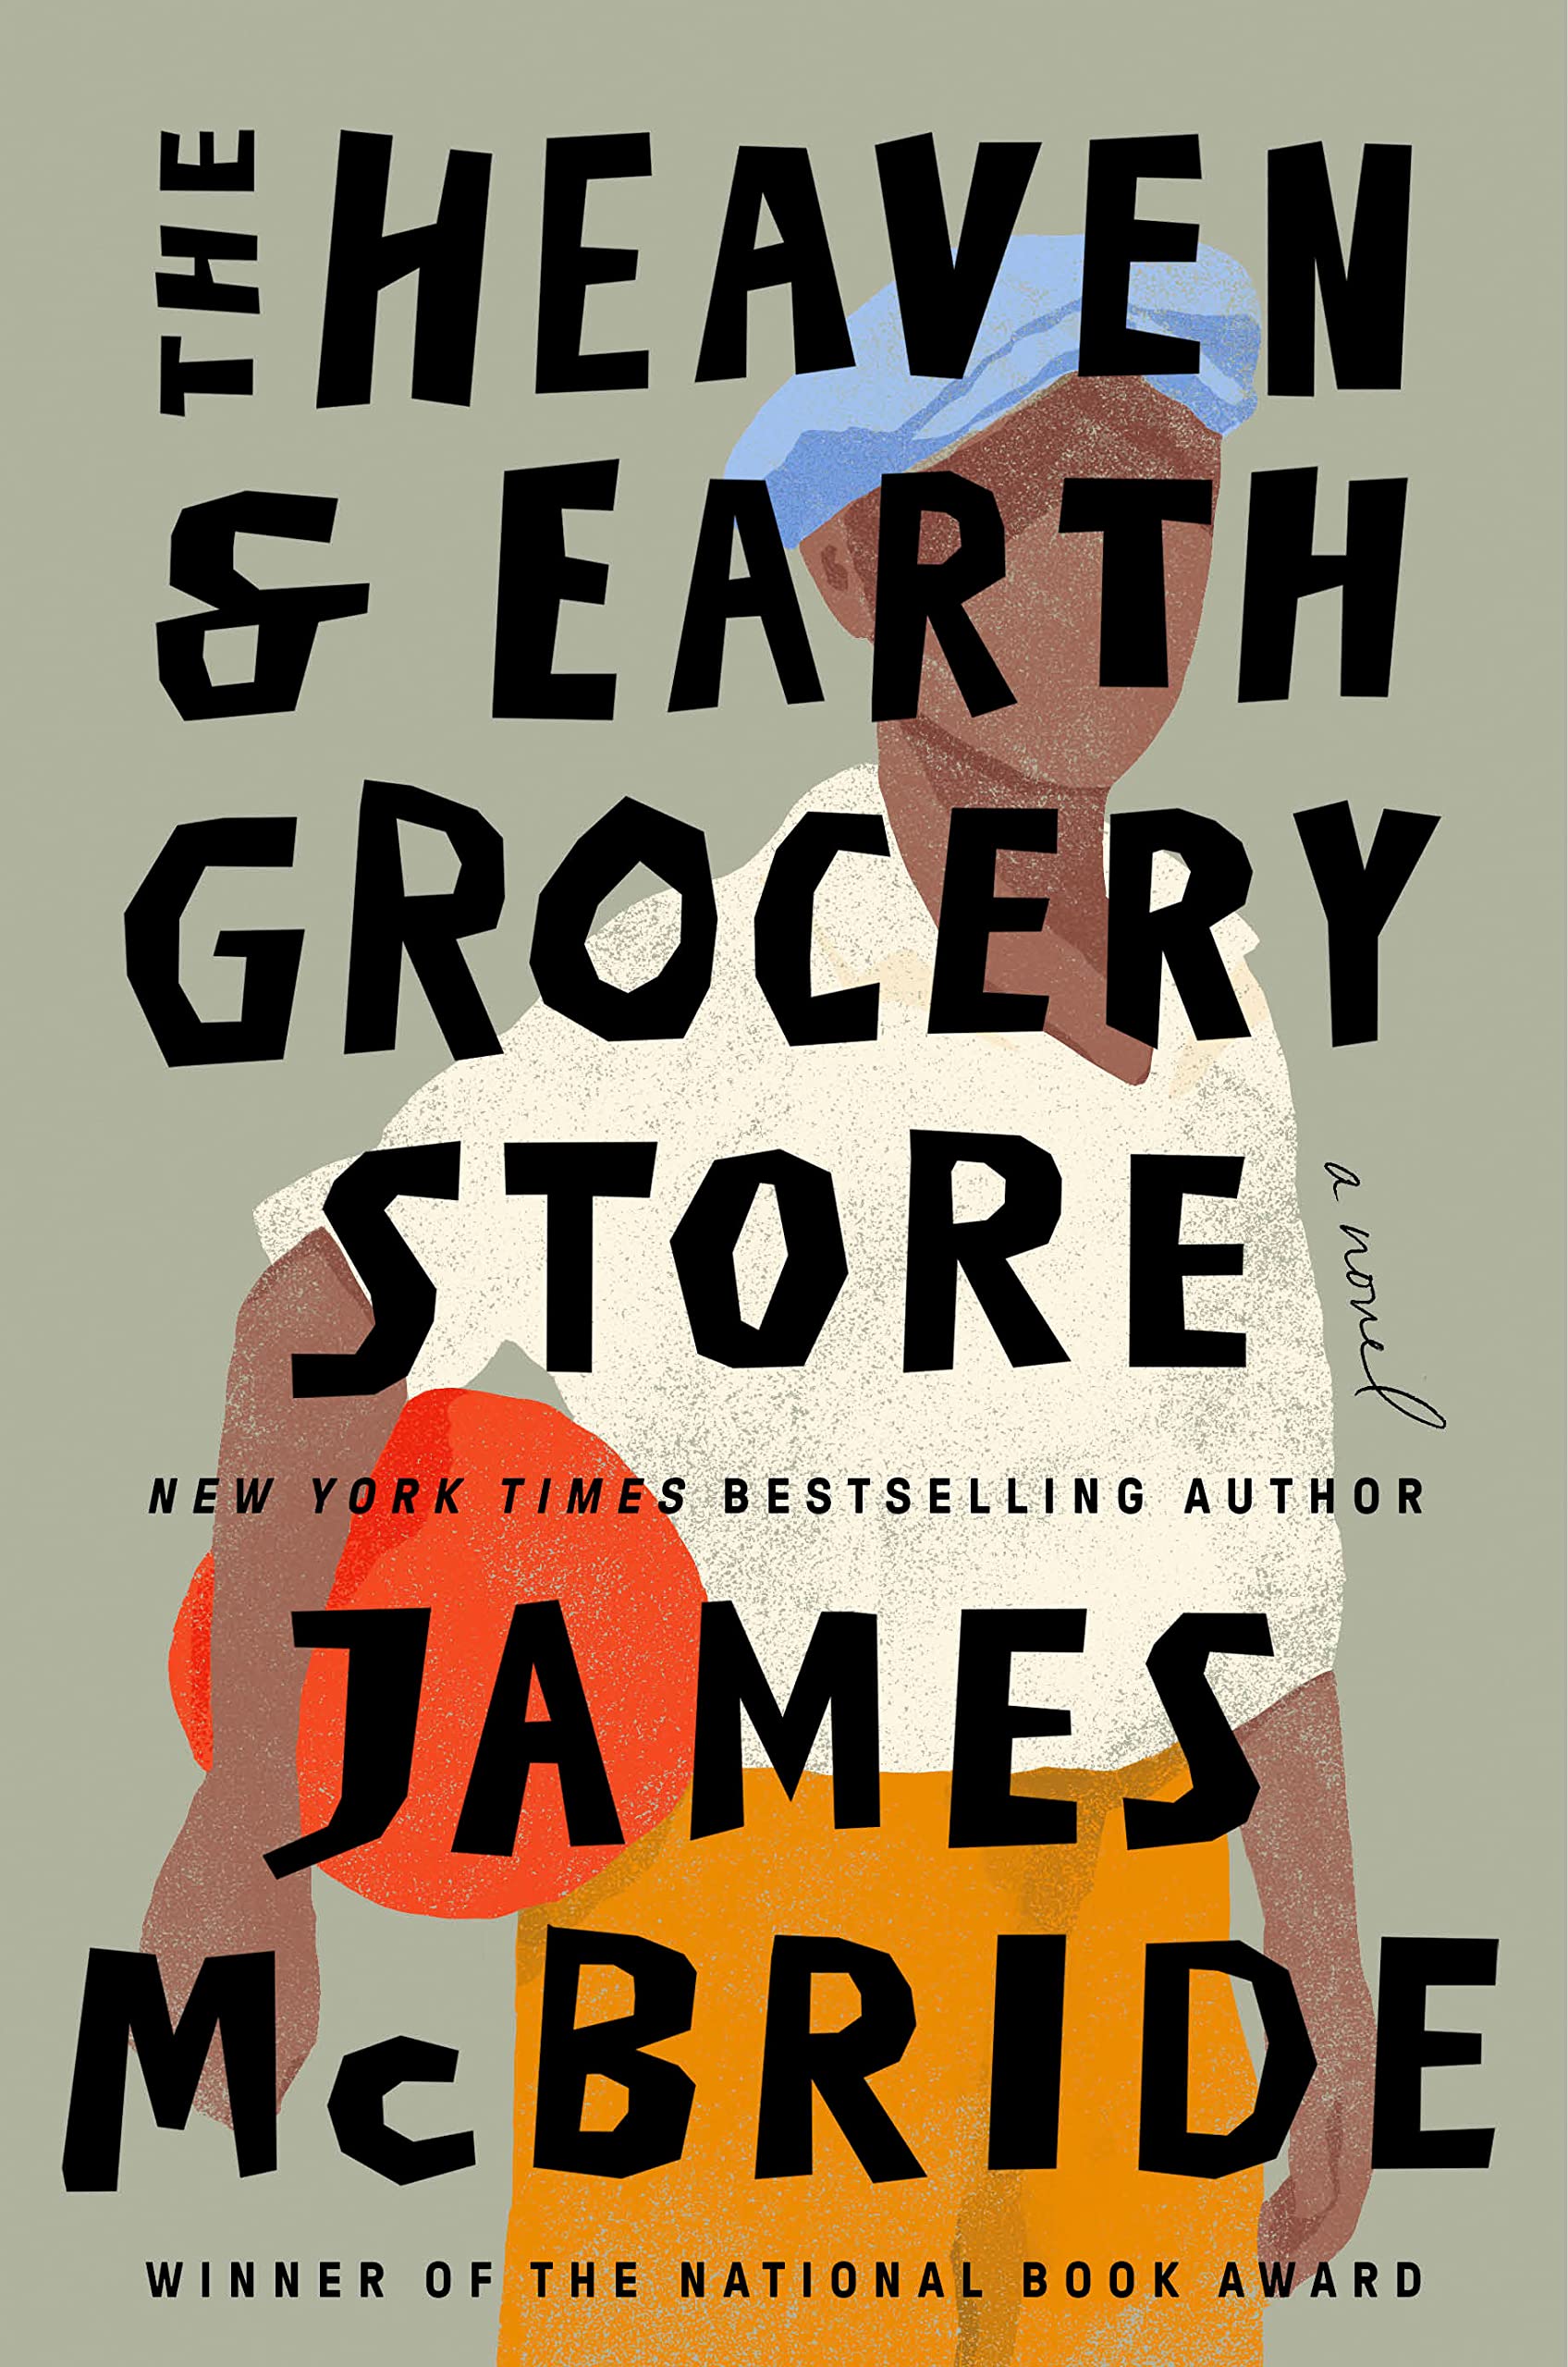 The cover of The Heaven and Earth Grocery Store.